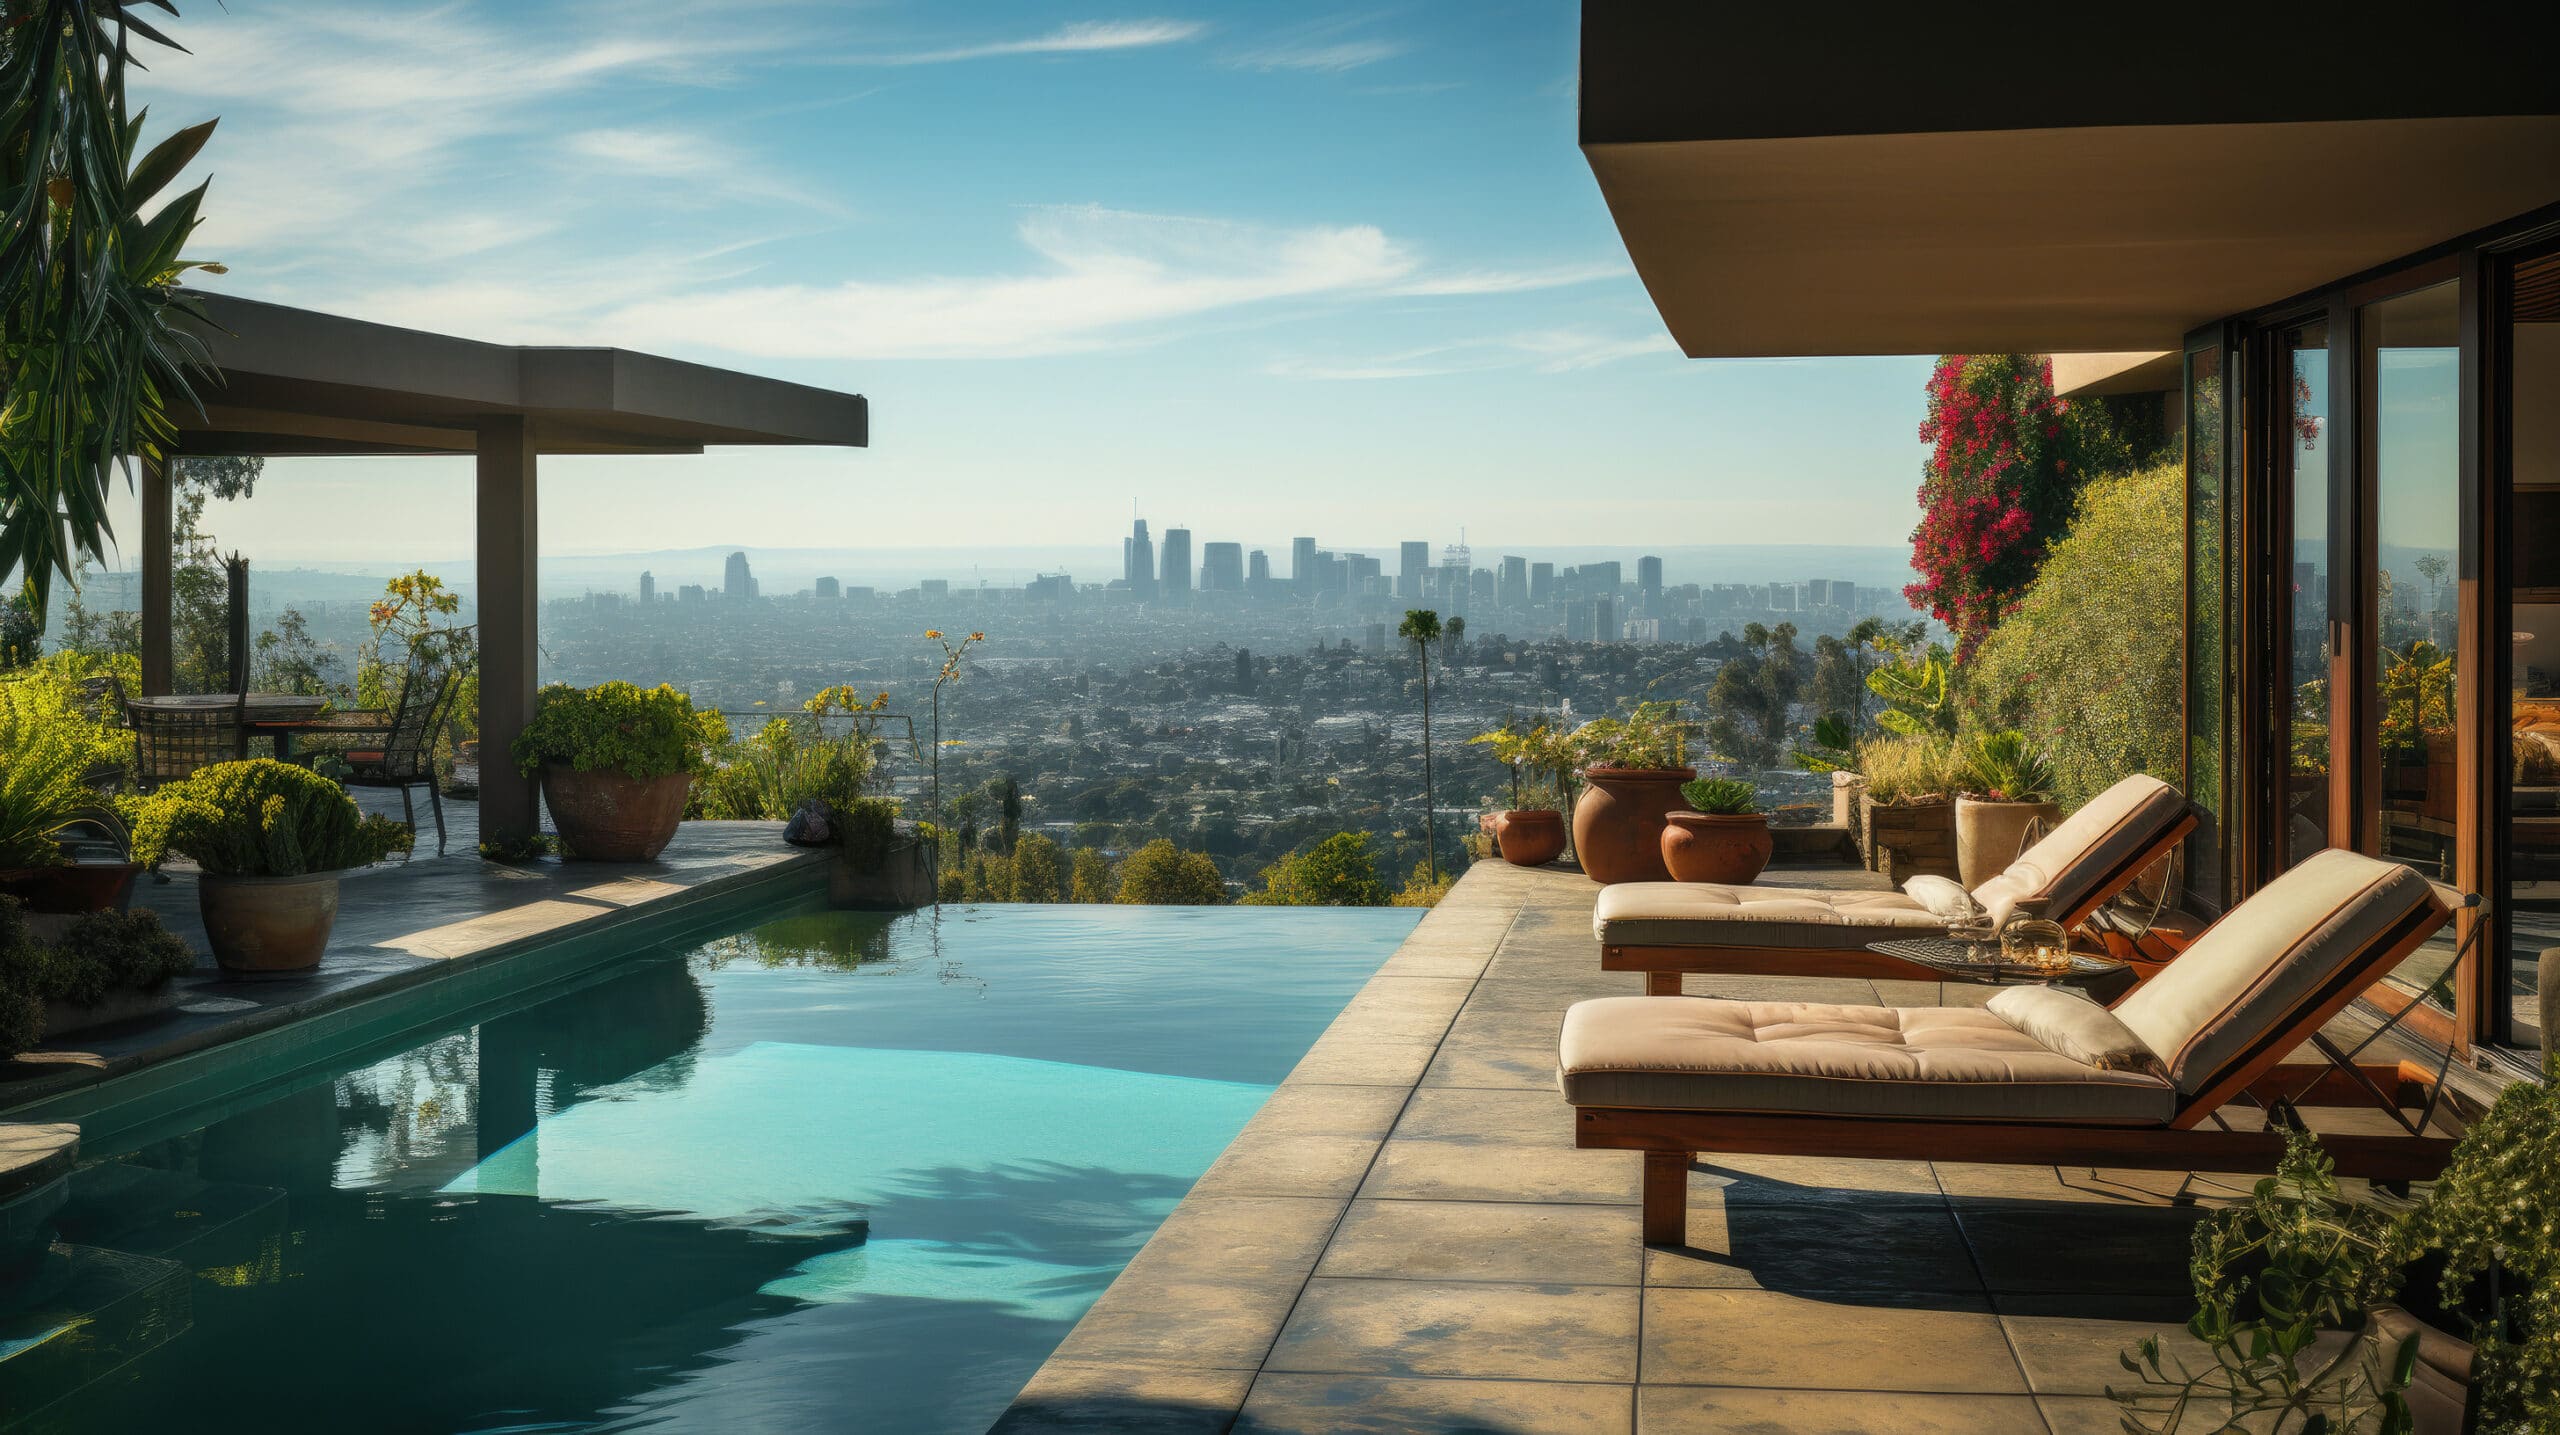 5 Key Aspects of Effective Estate Security in Beverly Hills for the Wealthy